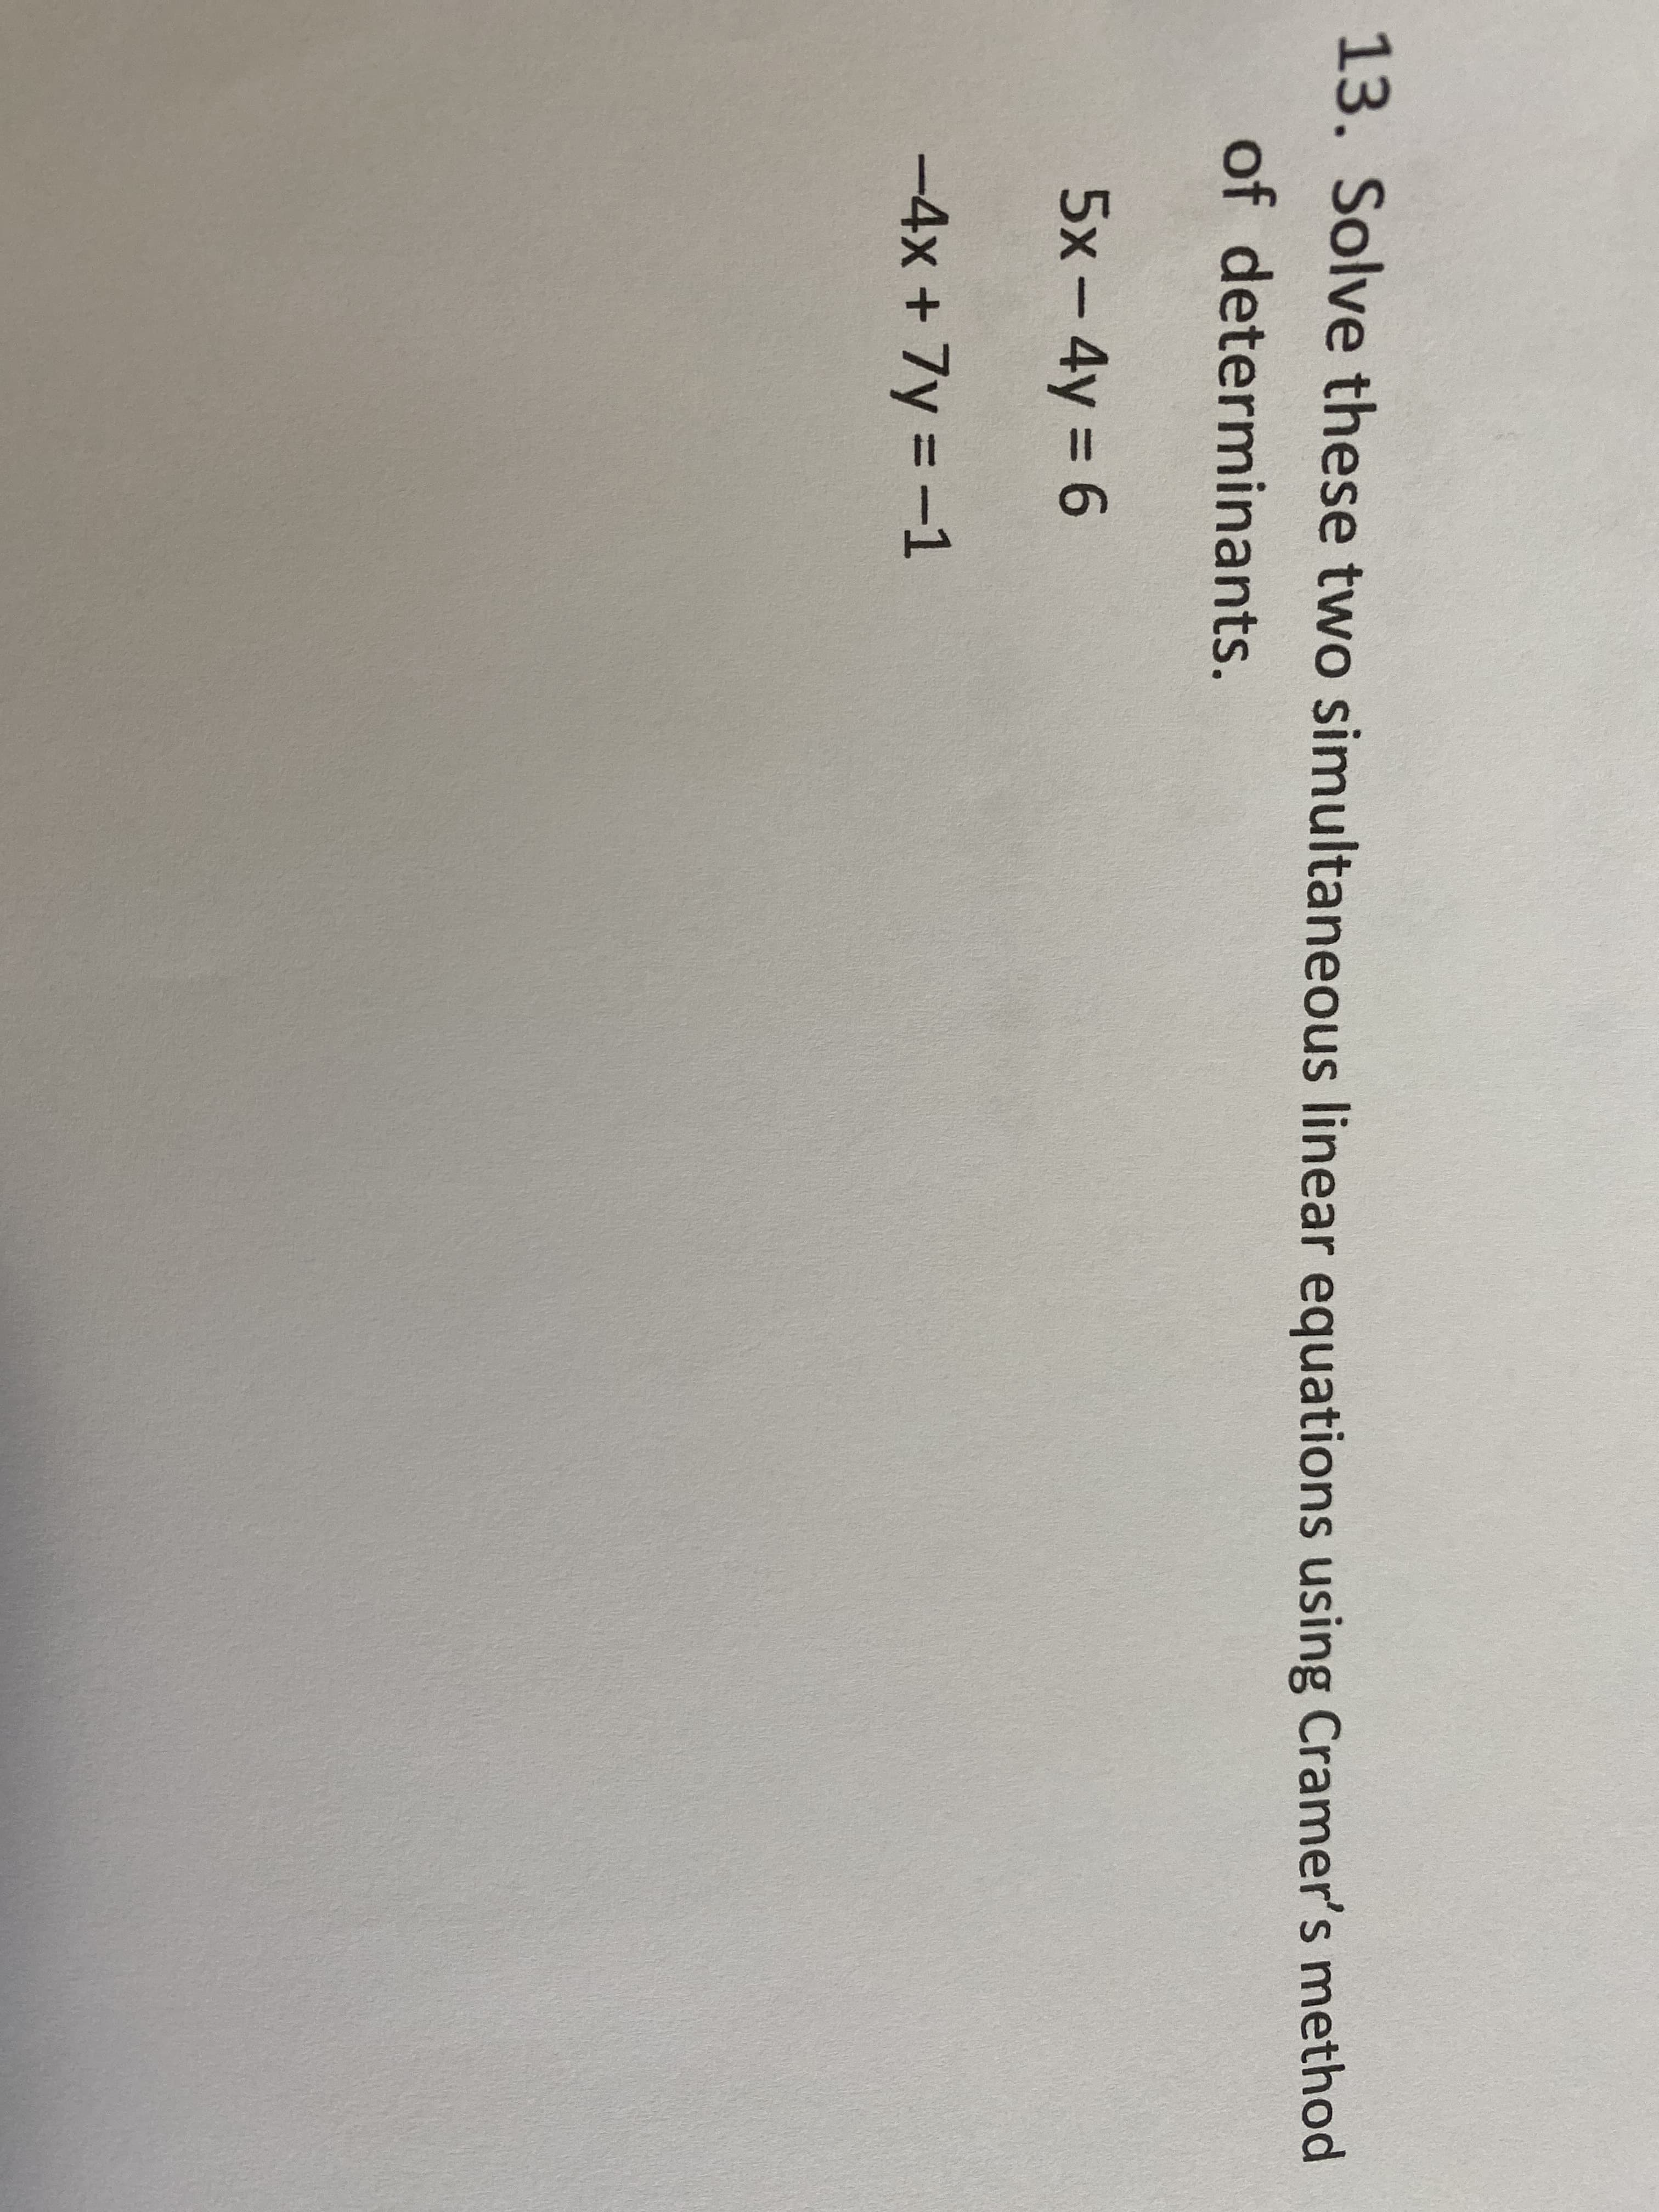 . Solve these two simultaneous linear equations using Cramer's method
of determinants.
